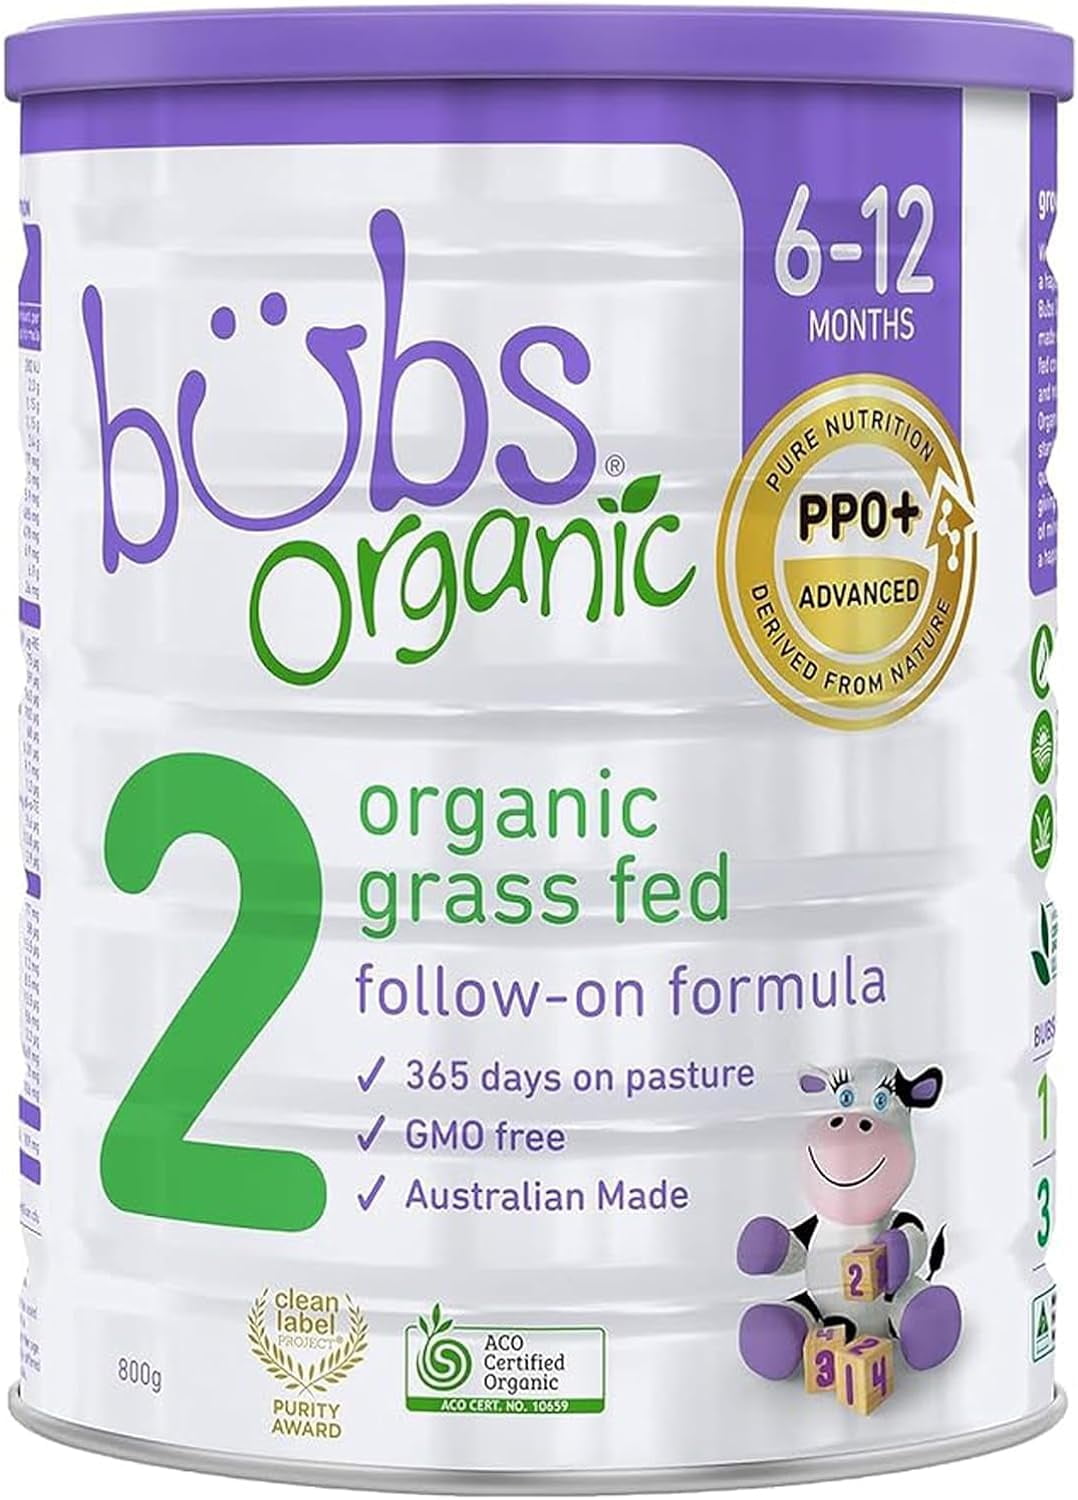 with Stage Formula Fed 28.2 Grass Made Organic Non-GMO Bubs months, Infants Follow-On Oz Milk, 2, Organic